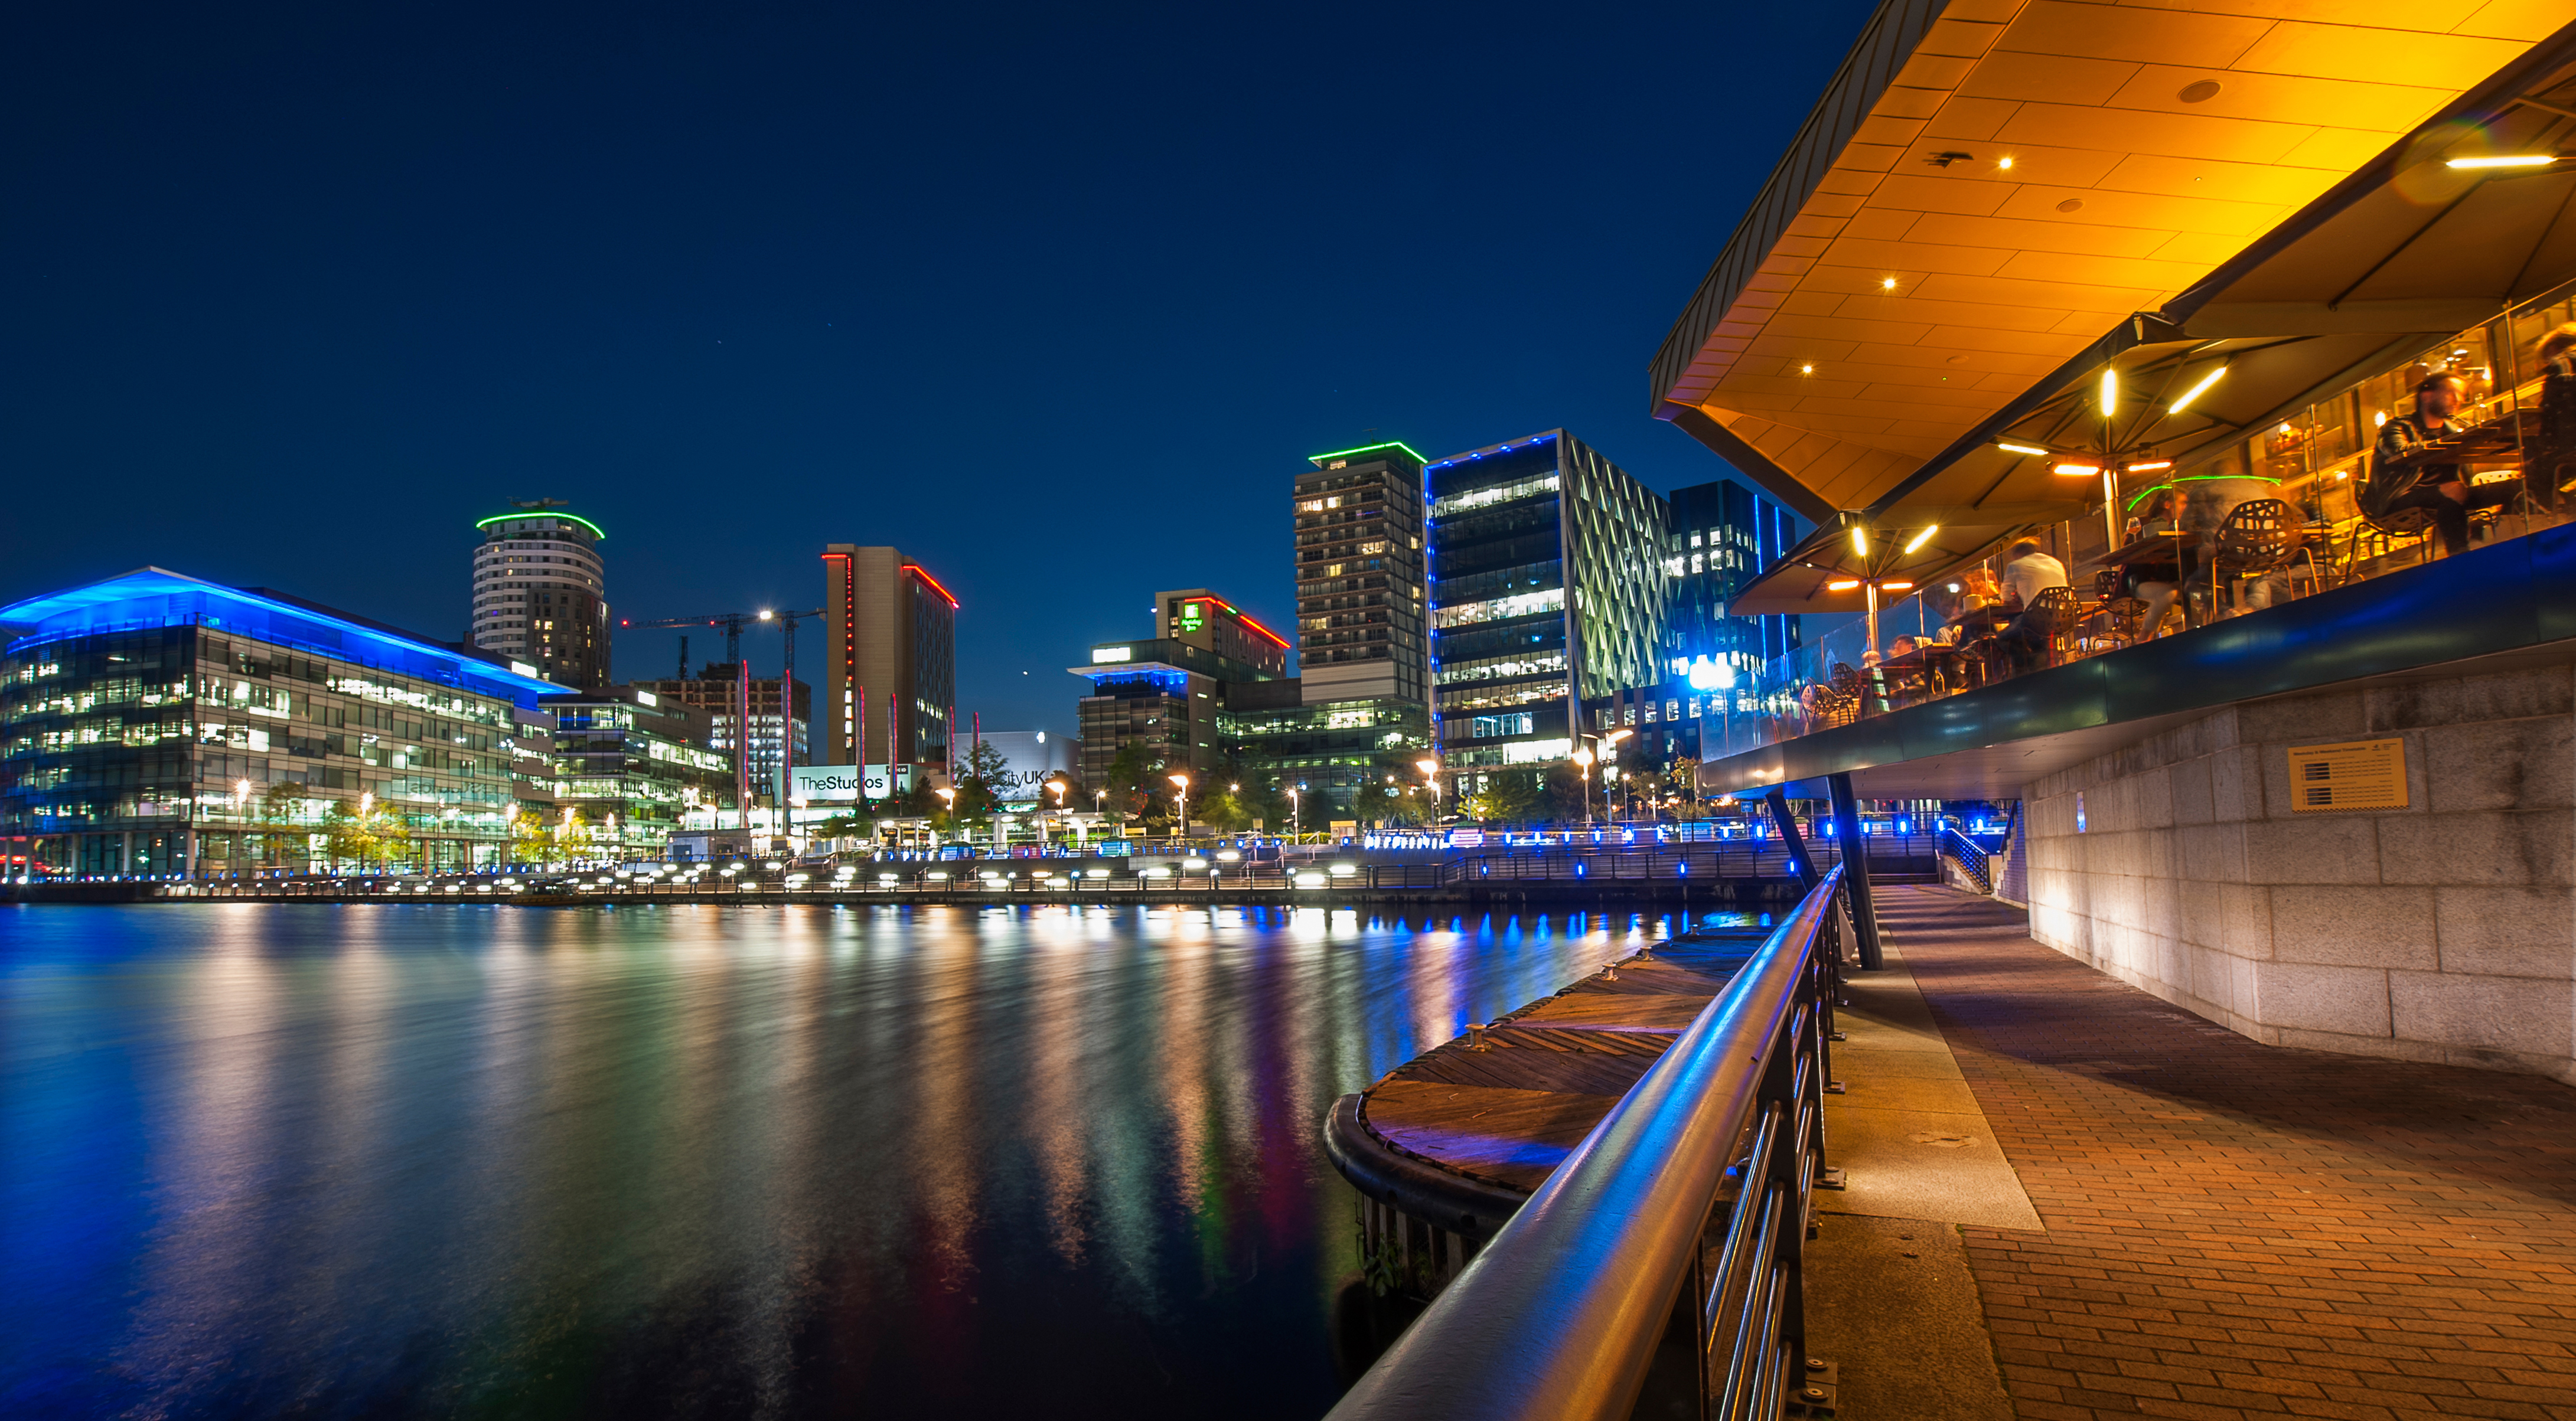 The Quays at night time